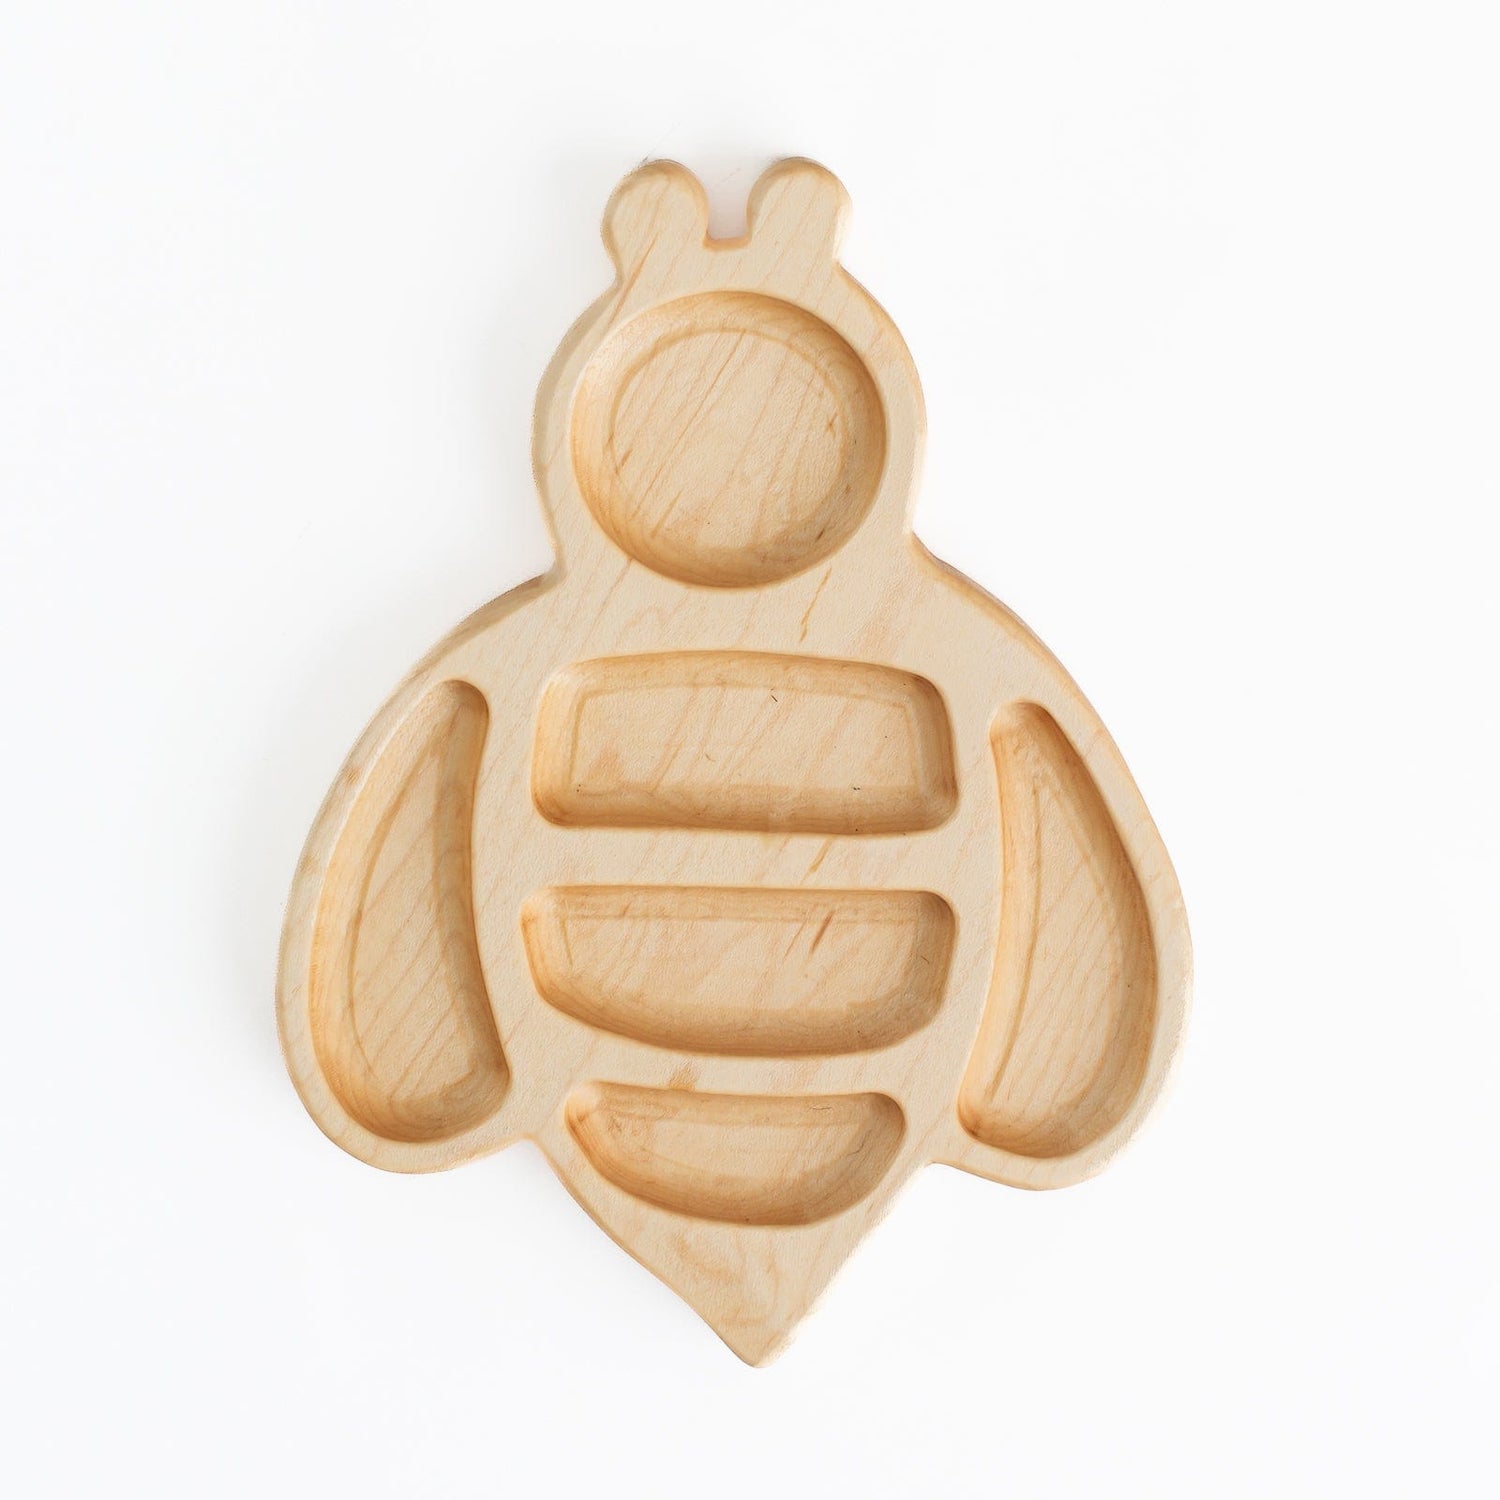 Aw & Co. Sensory Play Wooden Bumble Bee Plate / Sensory Tray (Made in Canada)